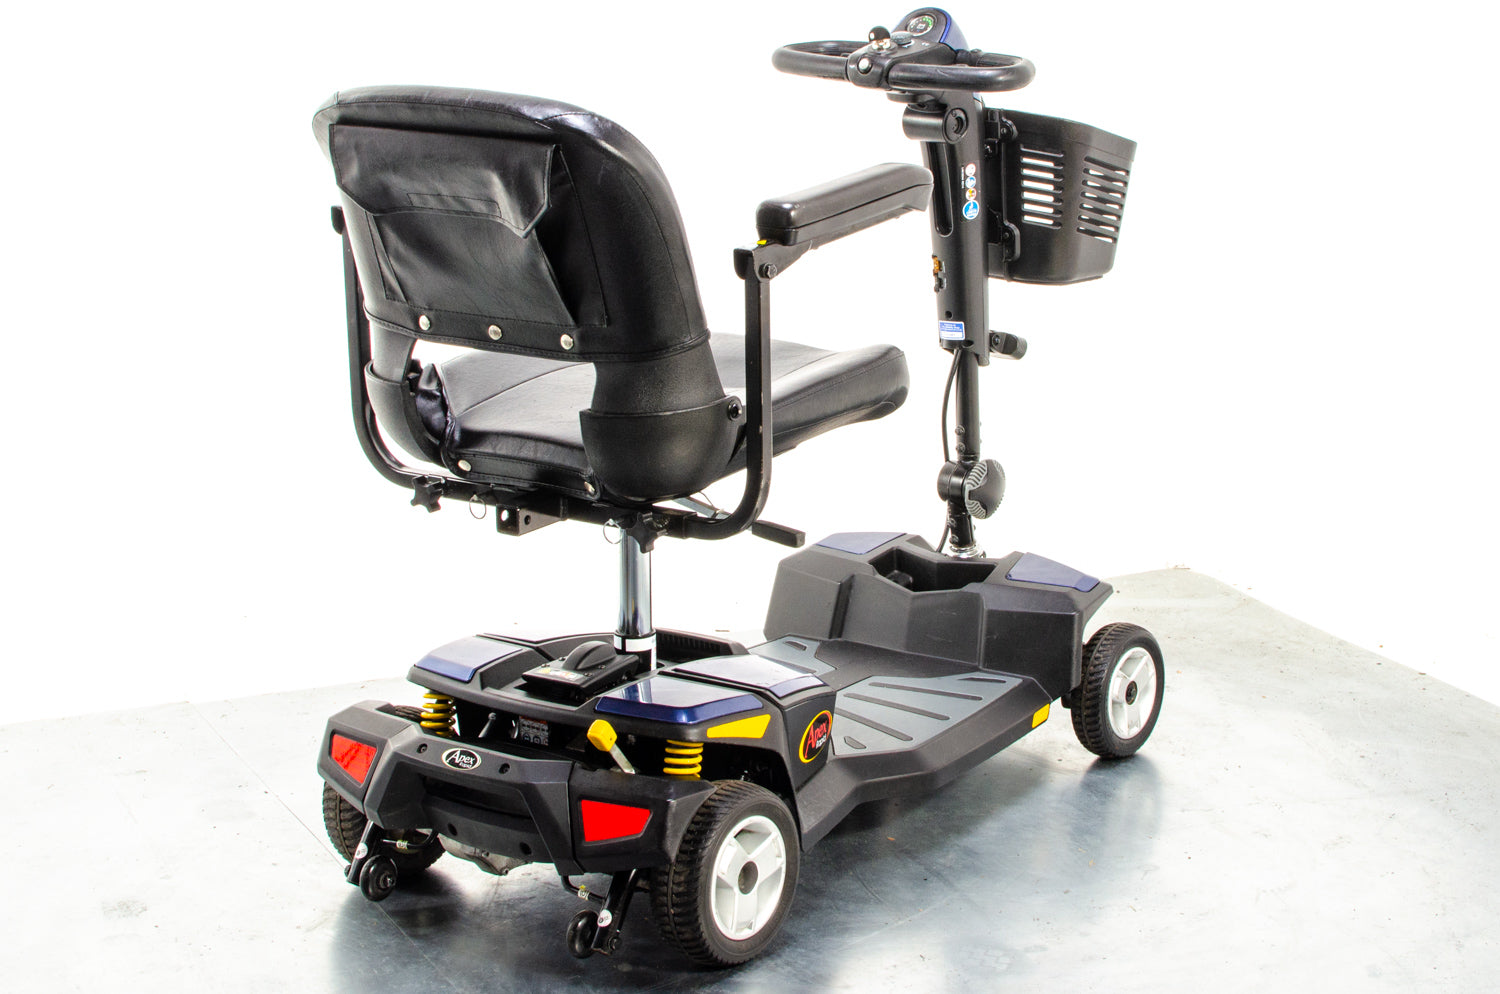 Pride Apex Rapid Used Mobility Scooter Transportable Small Lightweight Boot Suspension in Blue